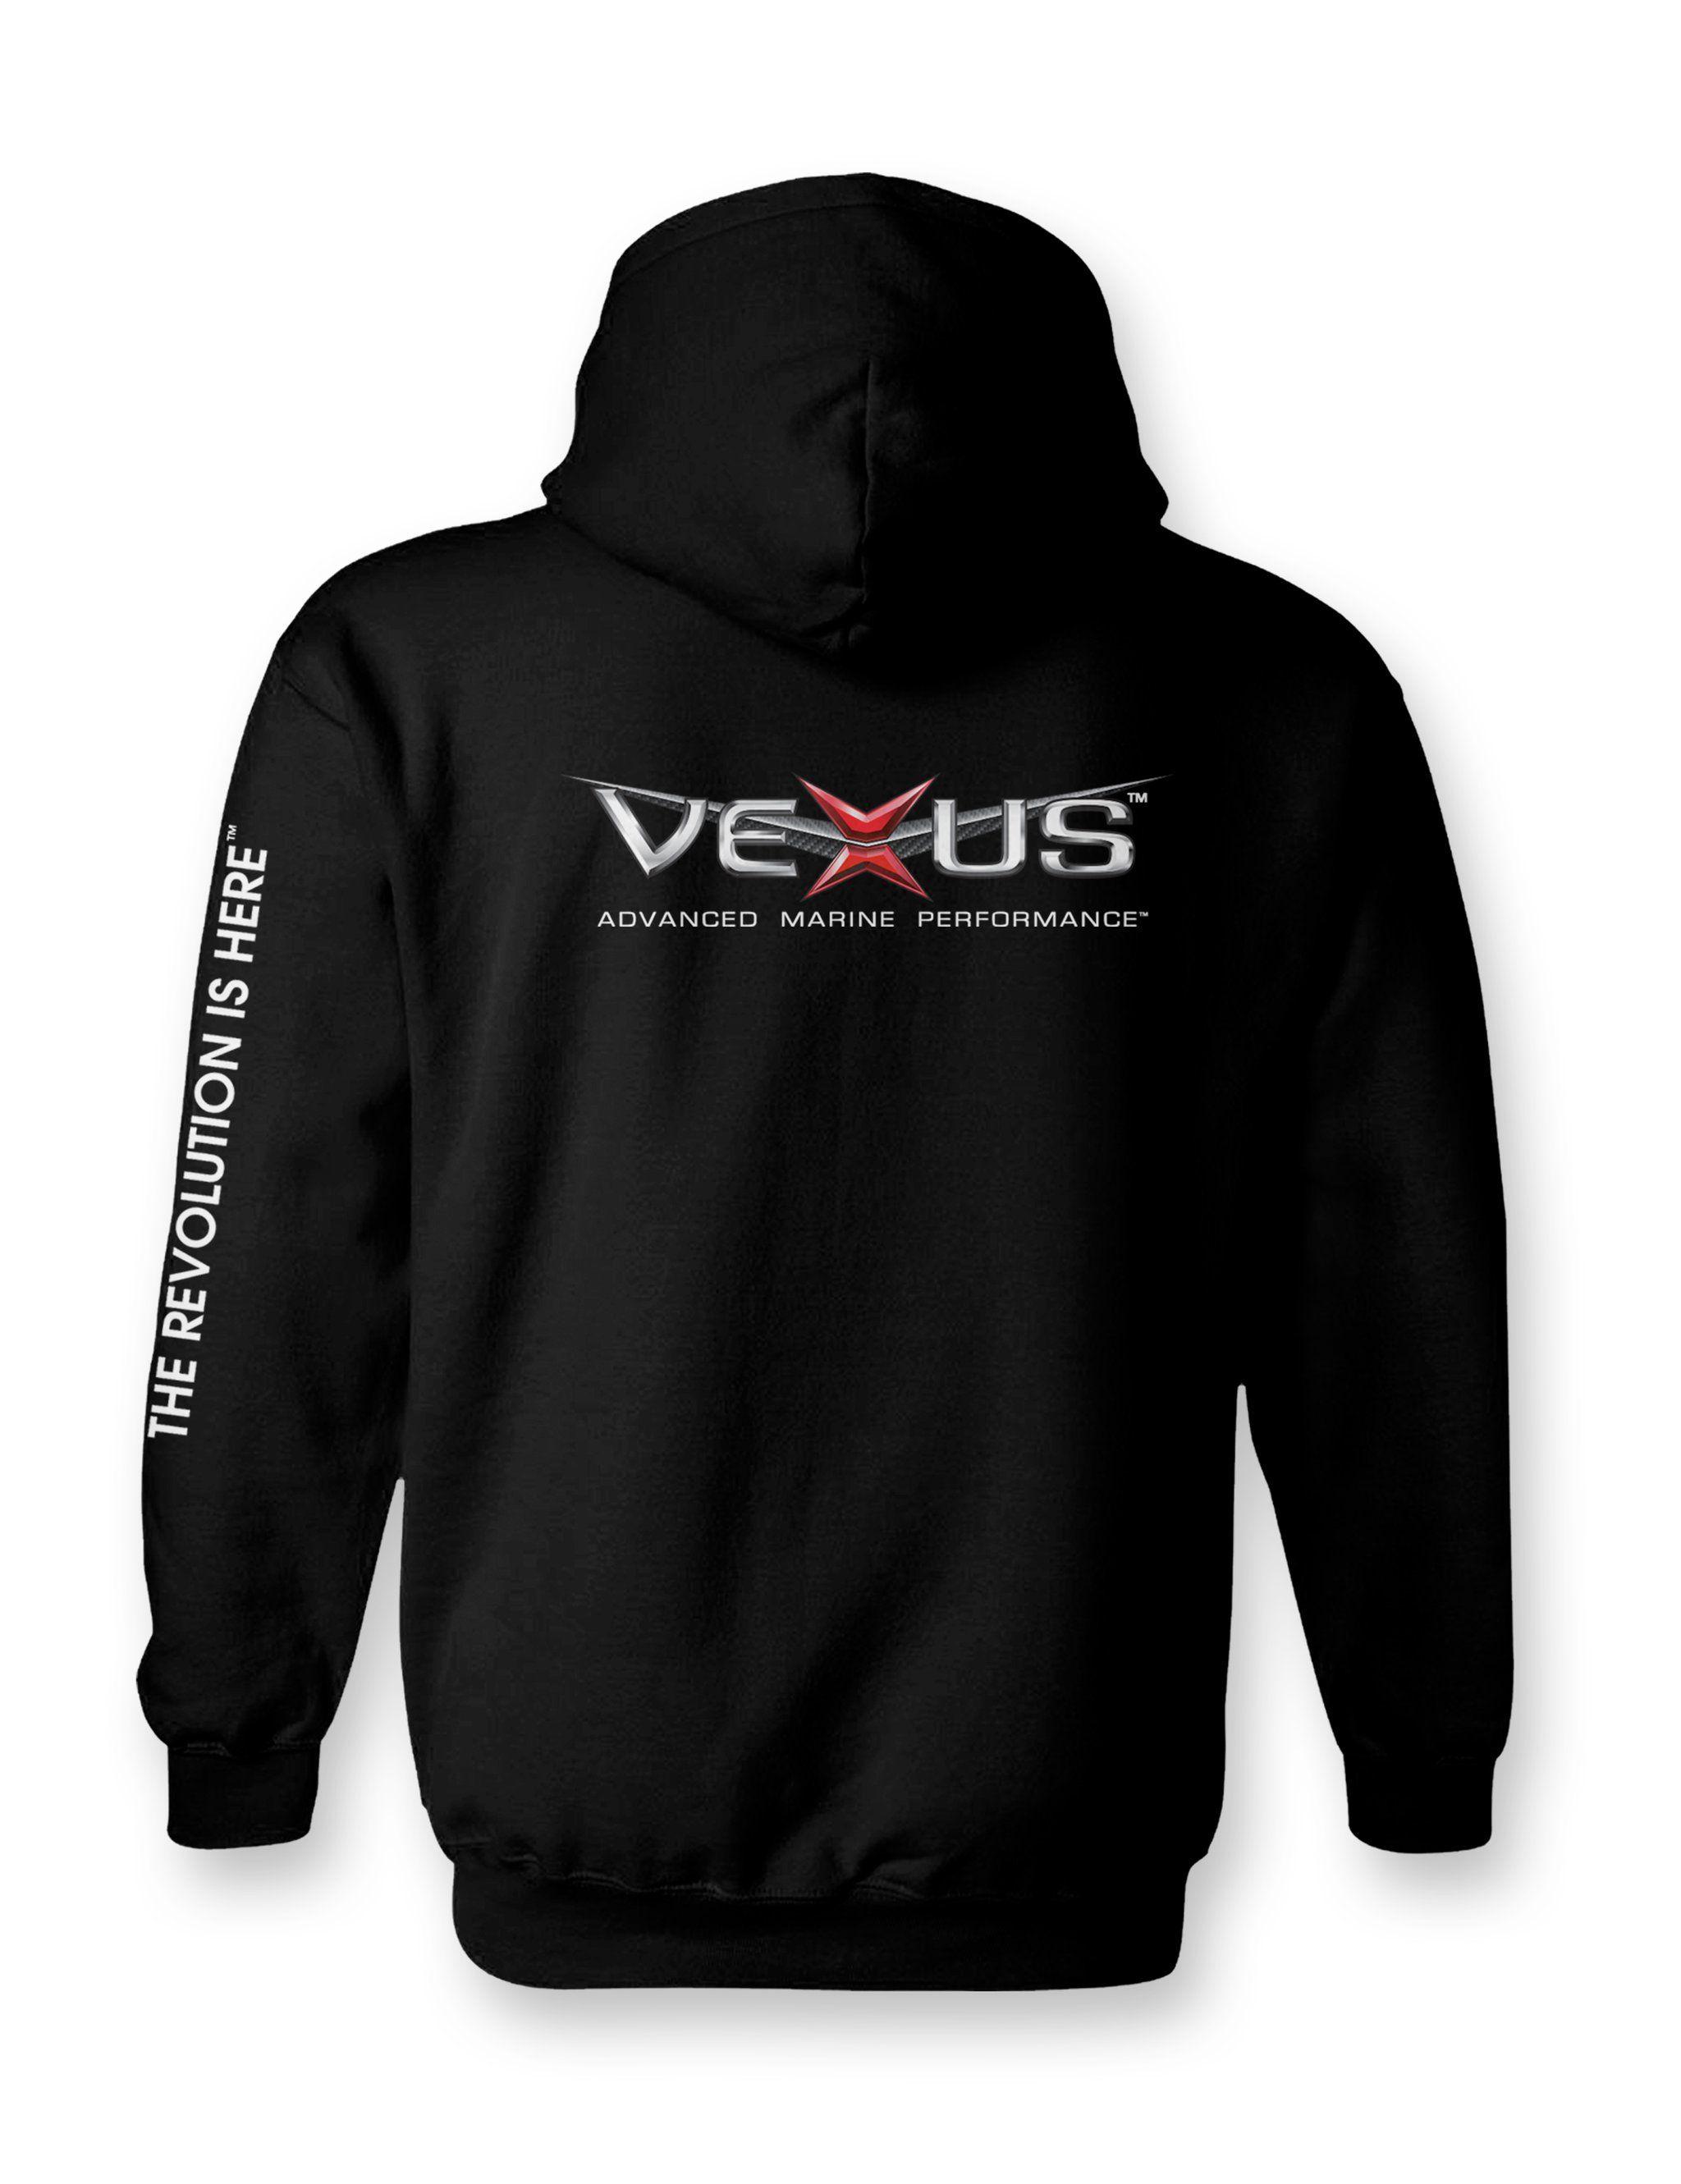 Black and White Corporate Logo - Products - VexusGear / Topwater Brands